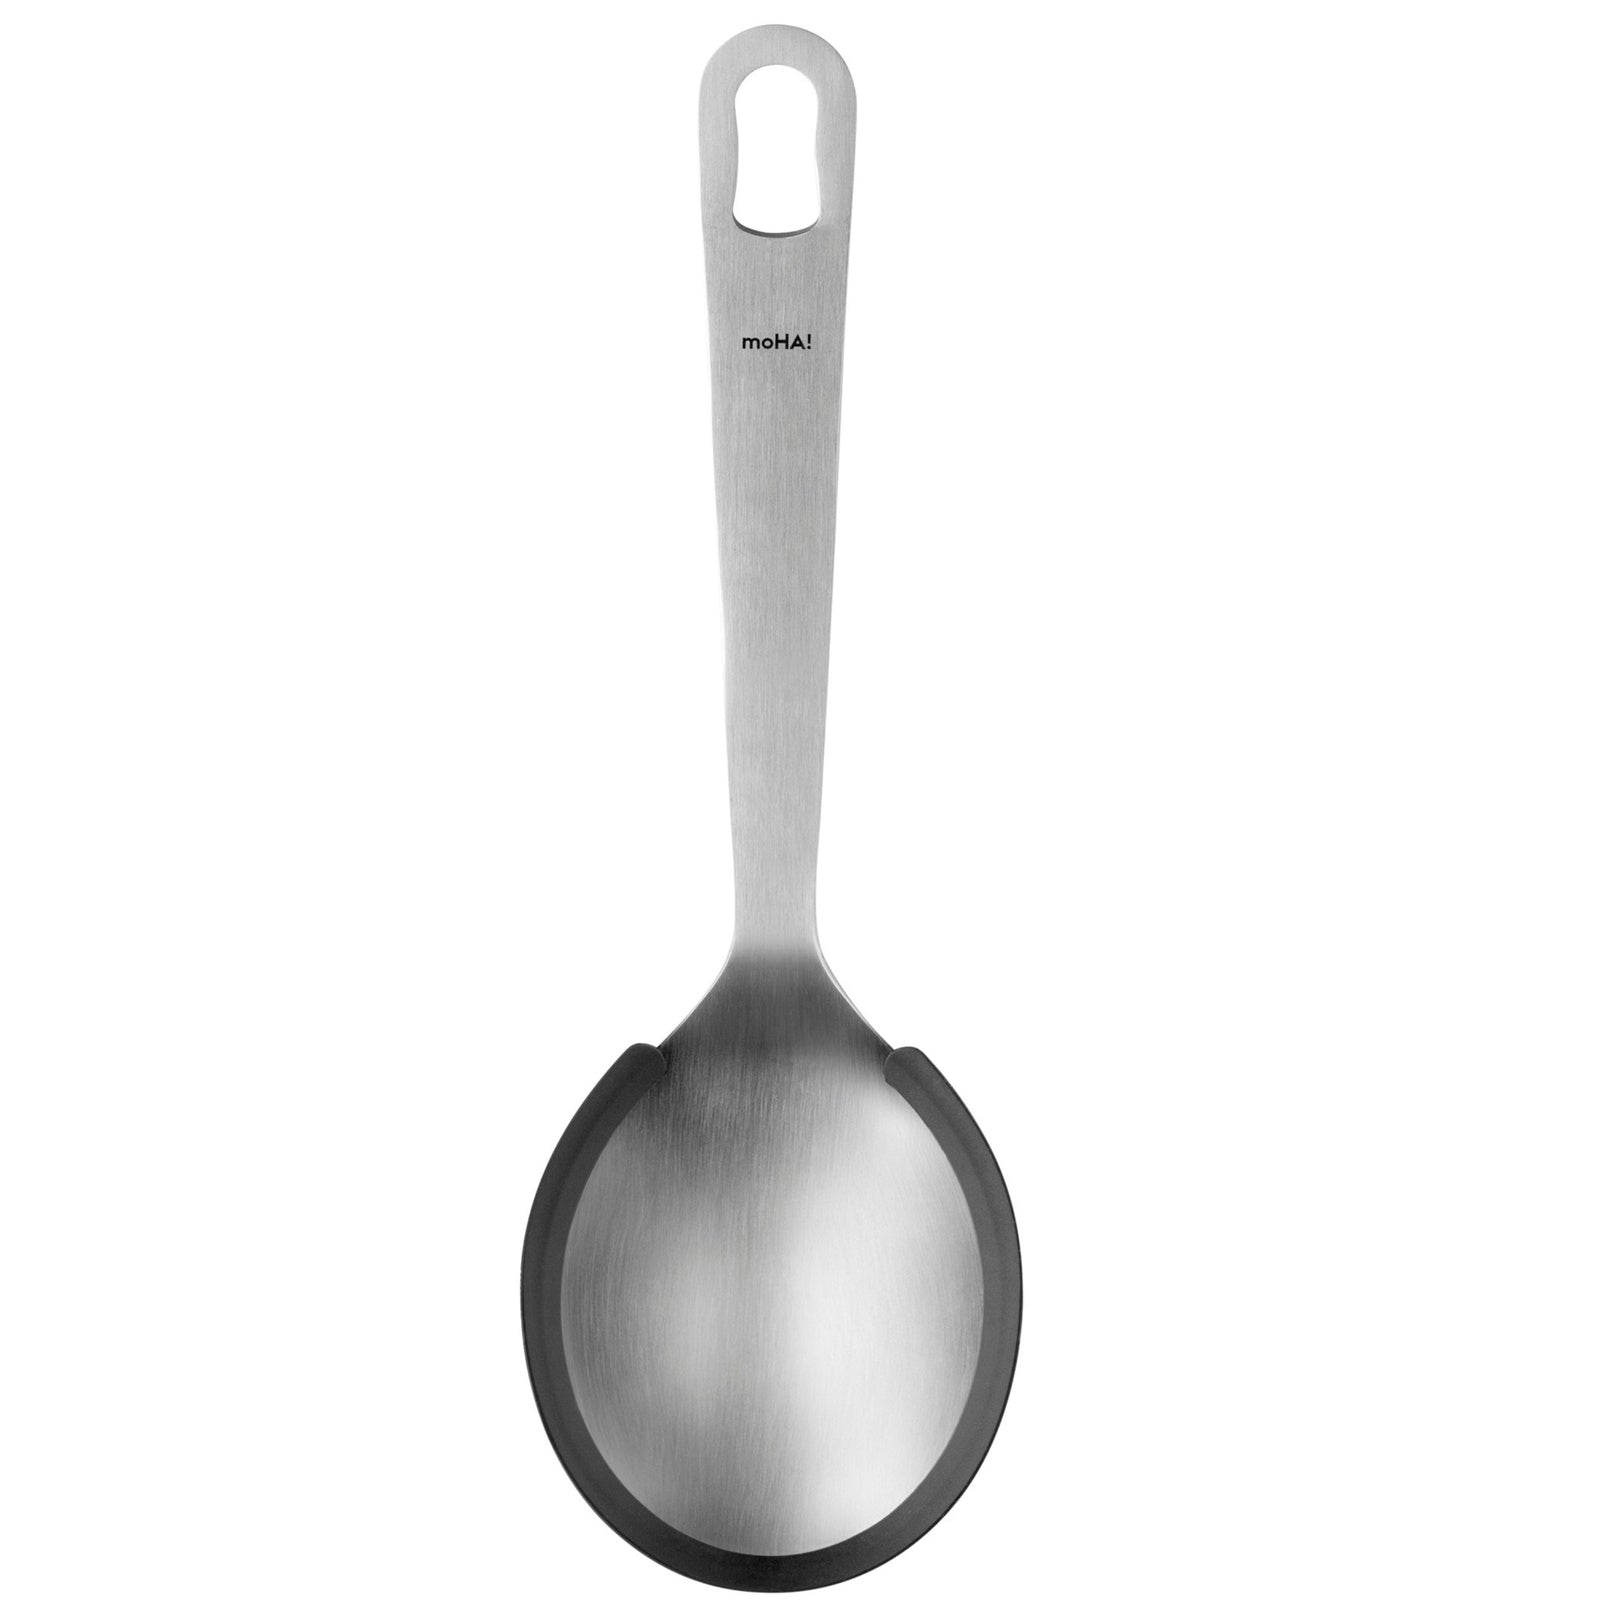 Riso-Rice-Spoon,-Stainless-Steel/silicone,-Grey-Kitchen-Tools-and-Utensils